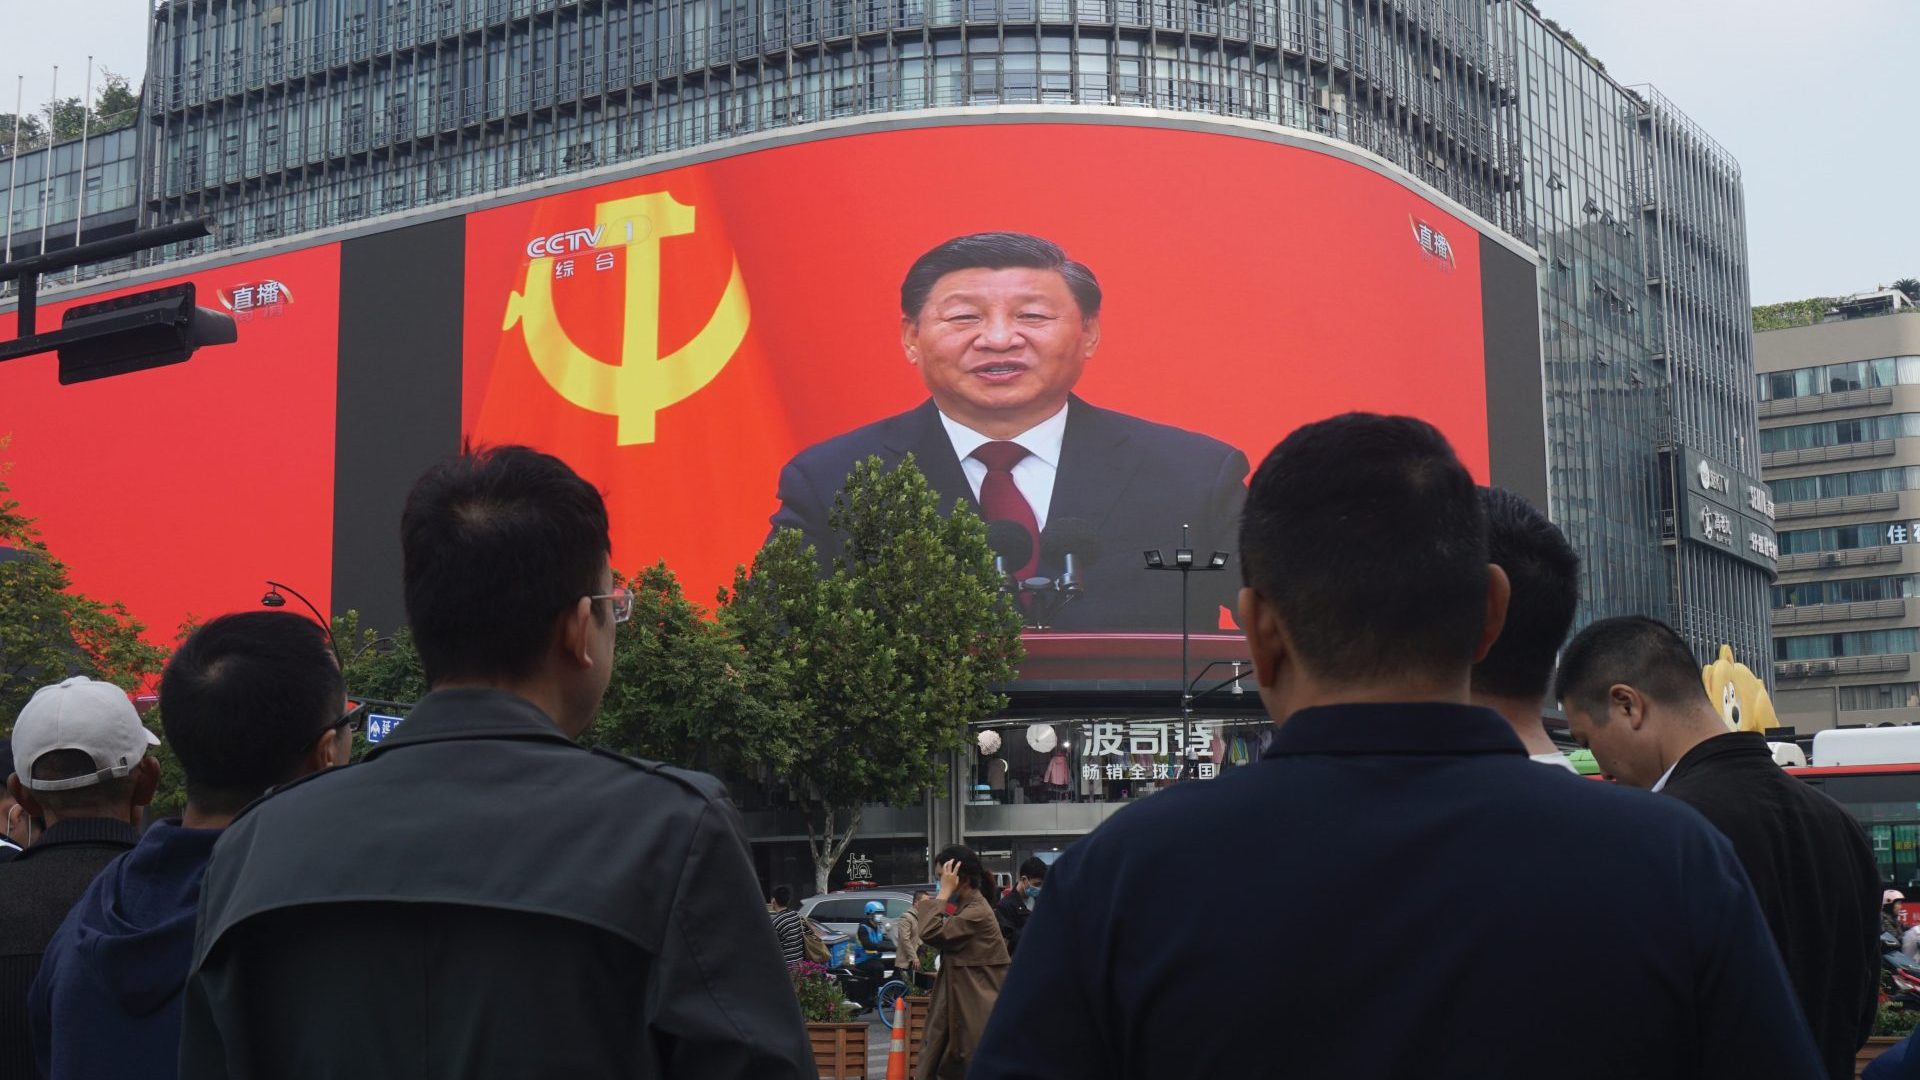 A giant screen in Hangzhou shows a televised speech by Xi Jinping at the closing ceremony of the 20th Communist Party Congress, October 2022. Photo: Long Wei/Feature China/Future Publishing/ Getty